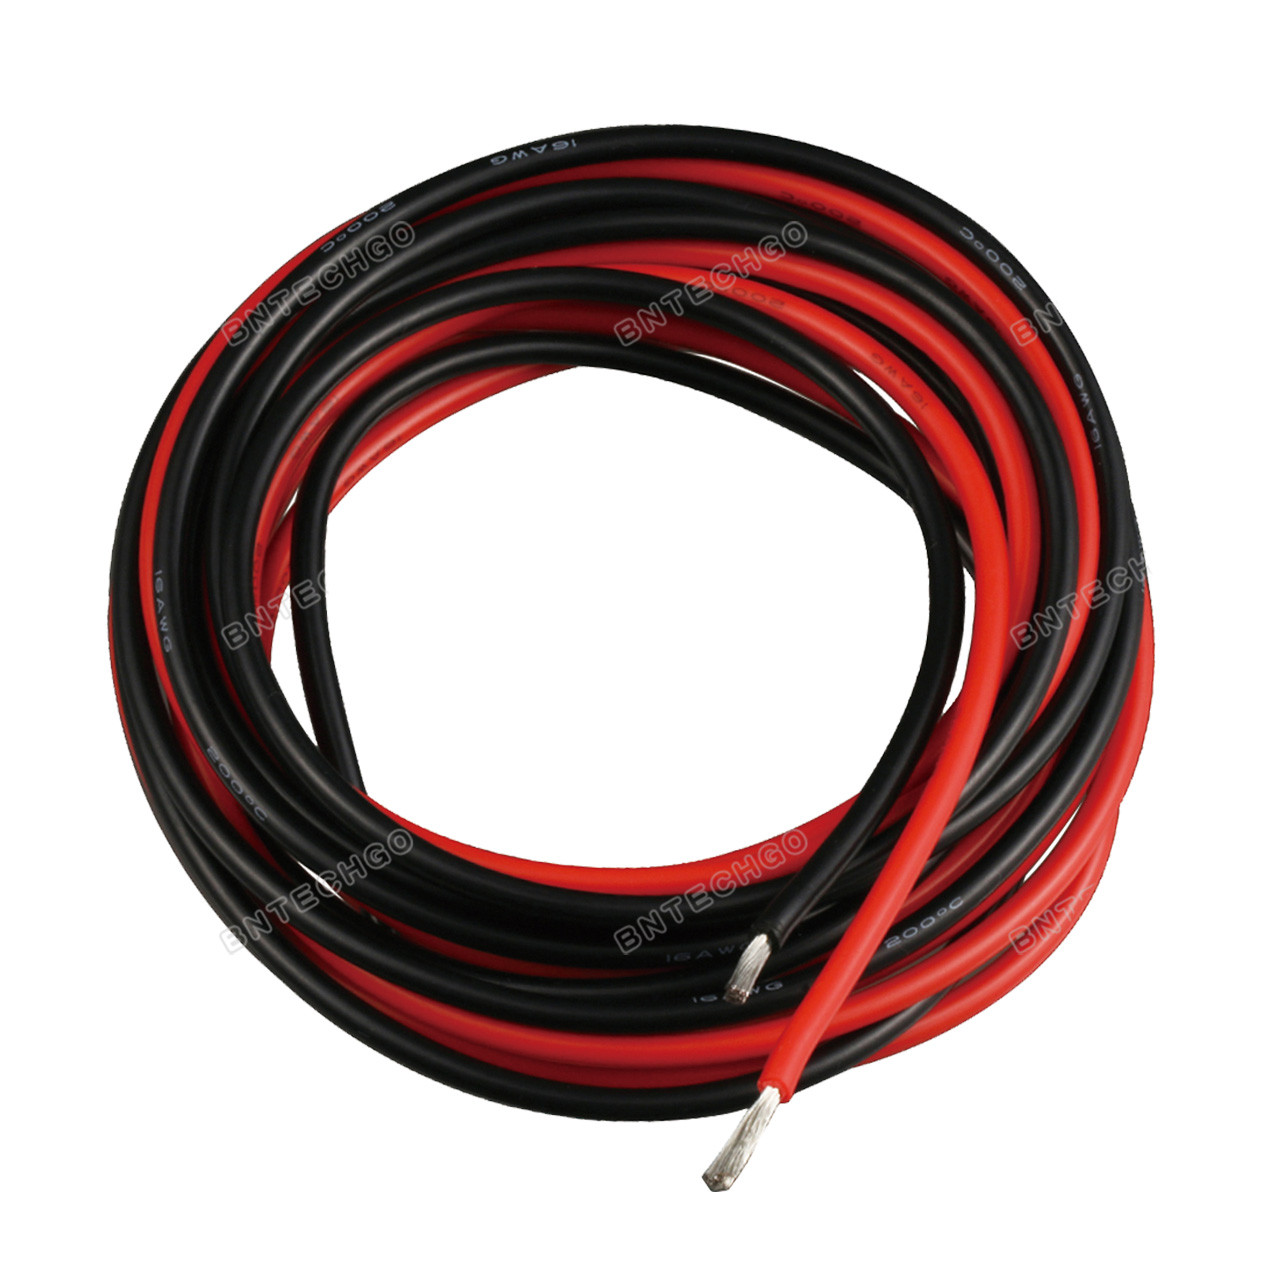 BNTECHGO 10 Gauge Silicone Wire Ultra Flexible 6 Feet(Black and Red Each  Color 3 ft) High Temp 200 deg C 600V 10 AWG Stranded Tinned Copper Wire